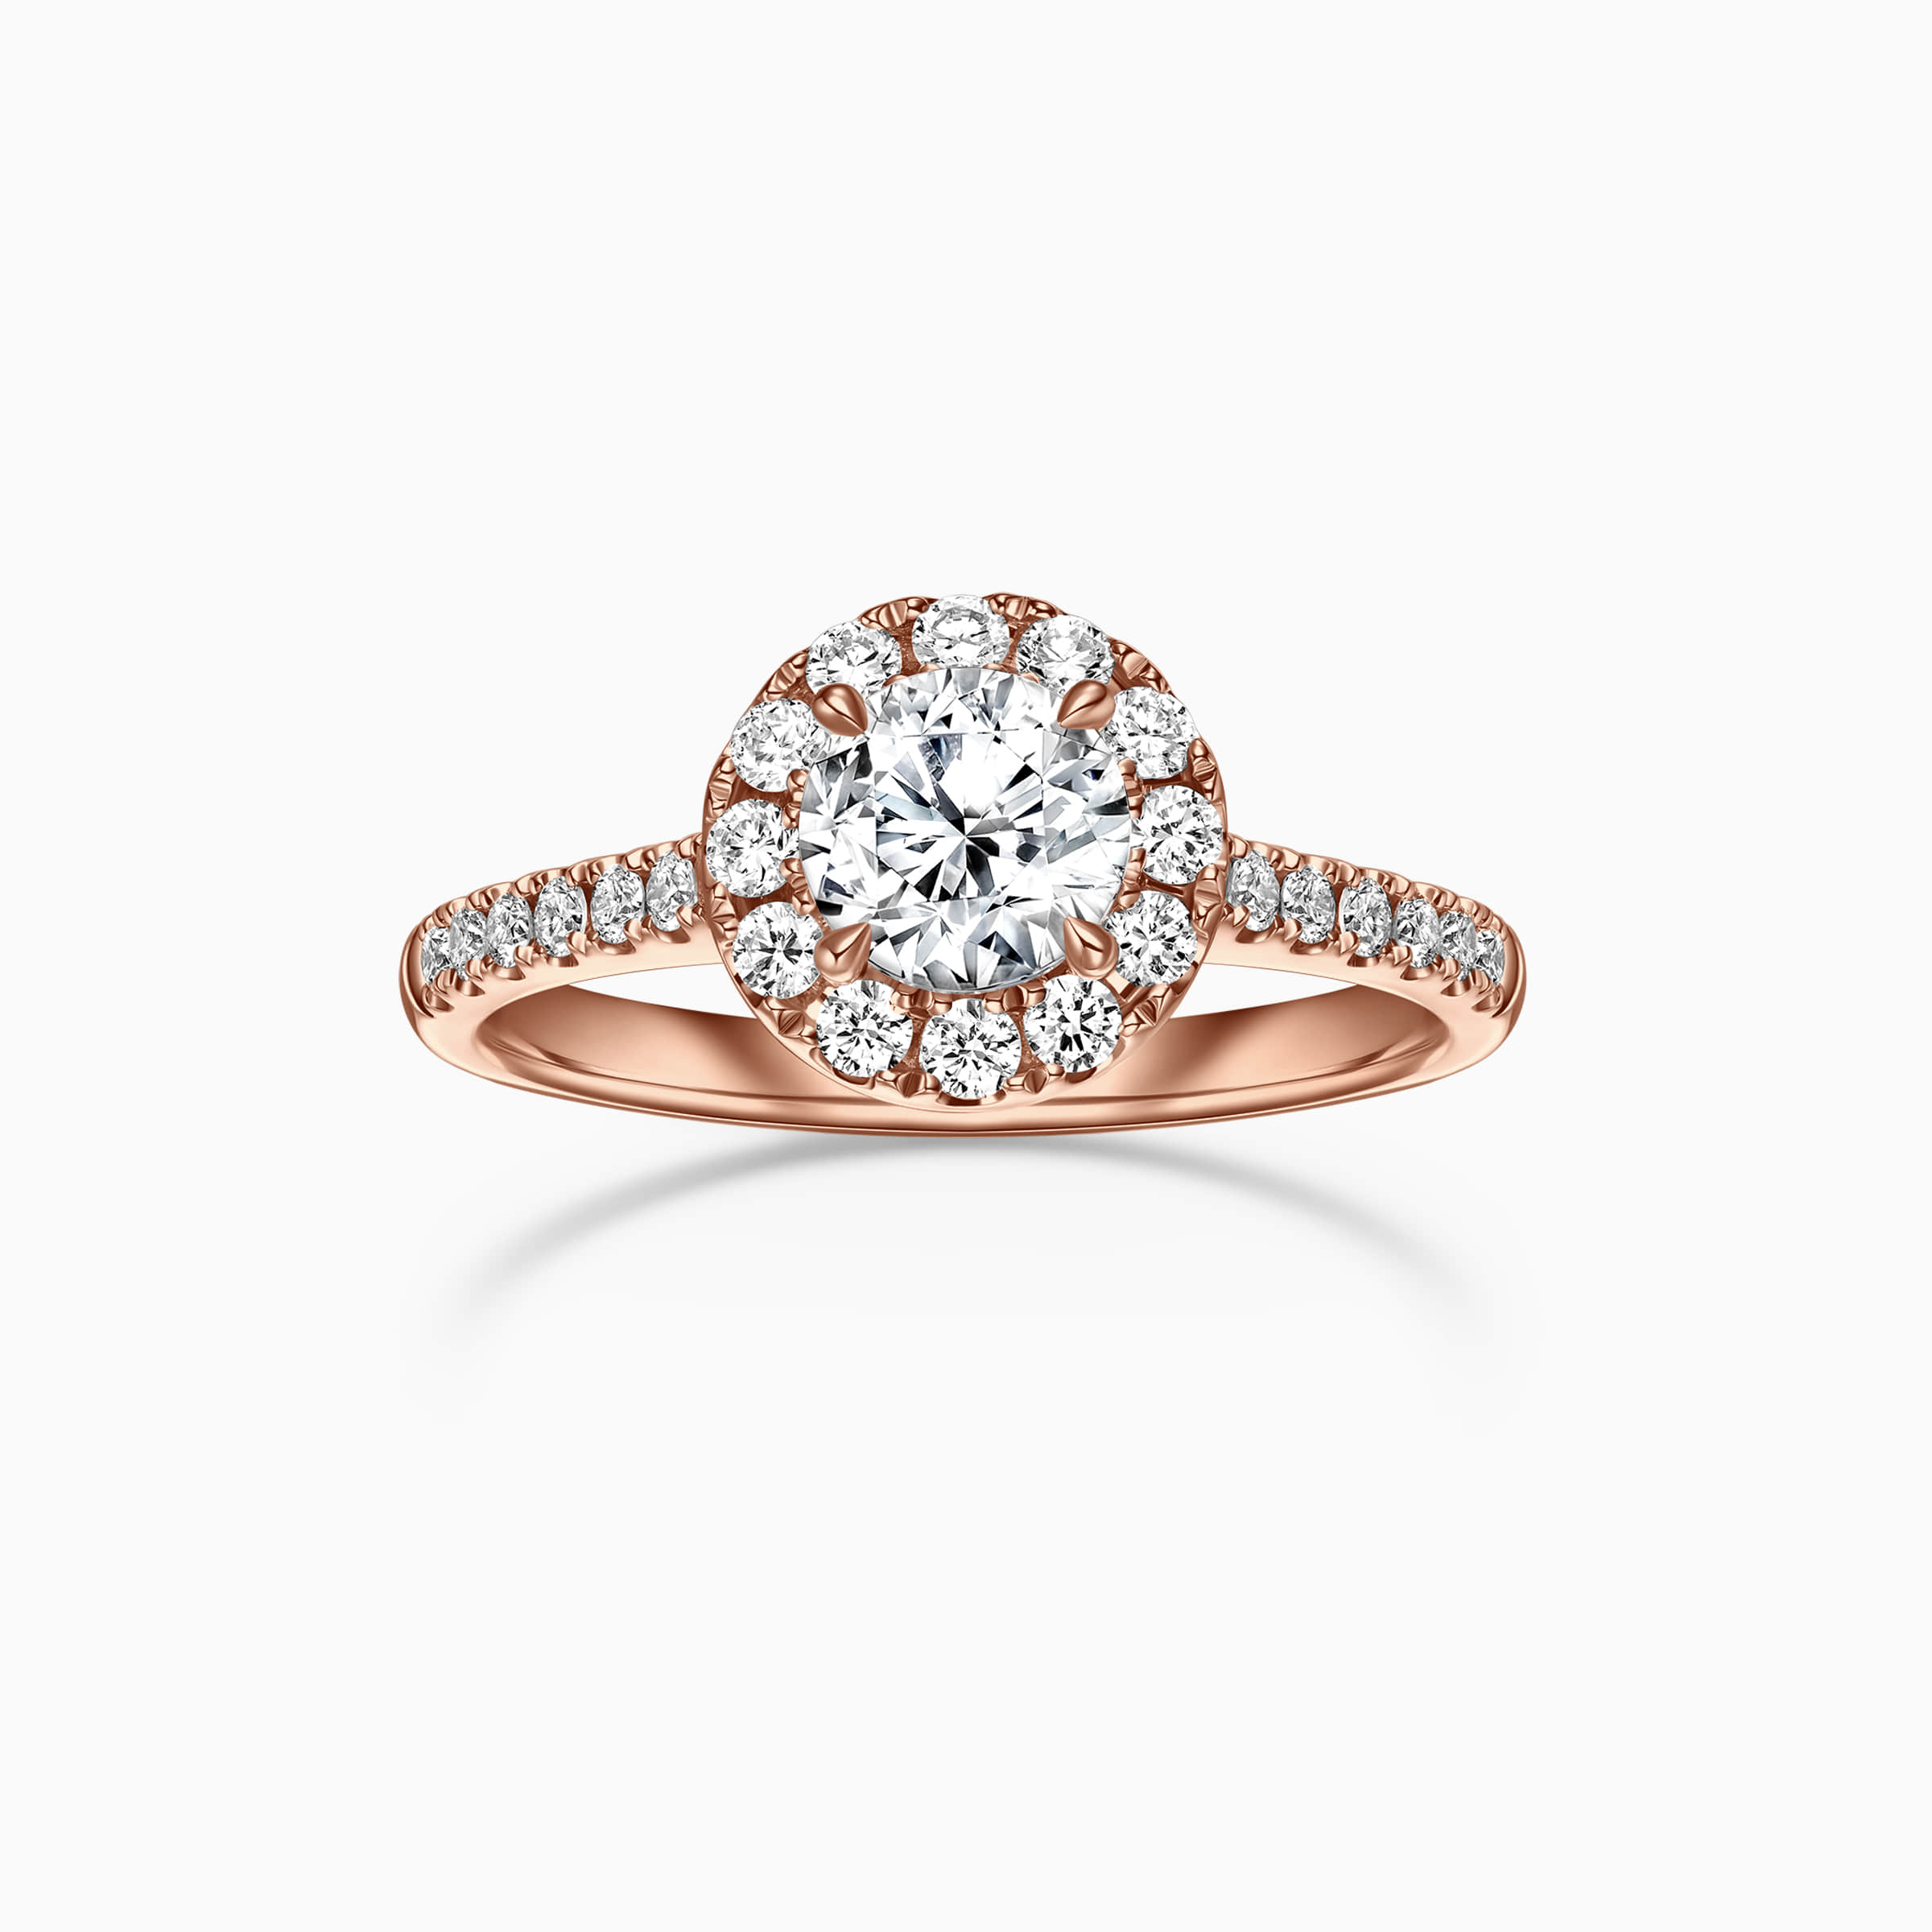 Darry Ring round halo engagement ring rose gold